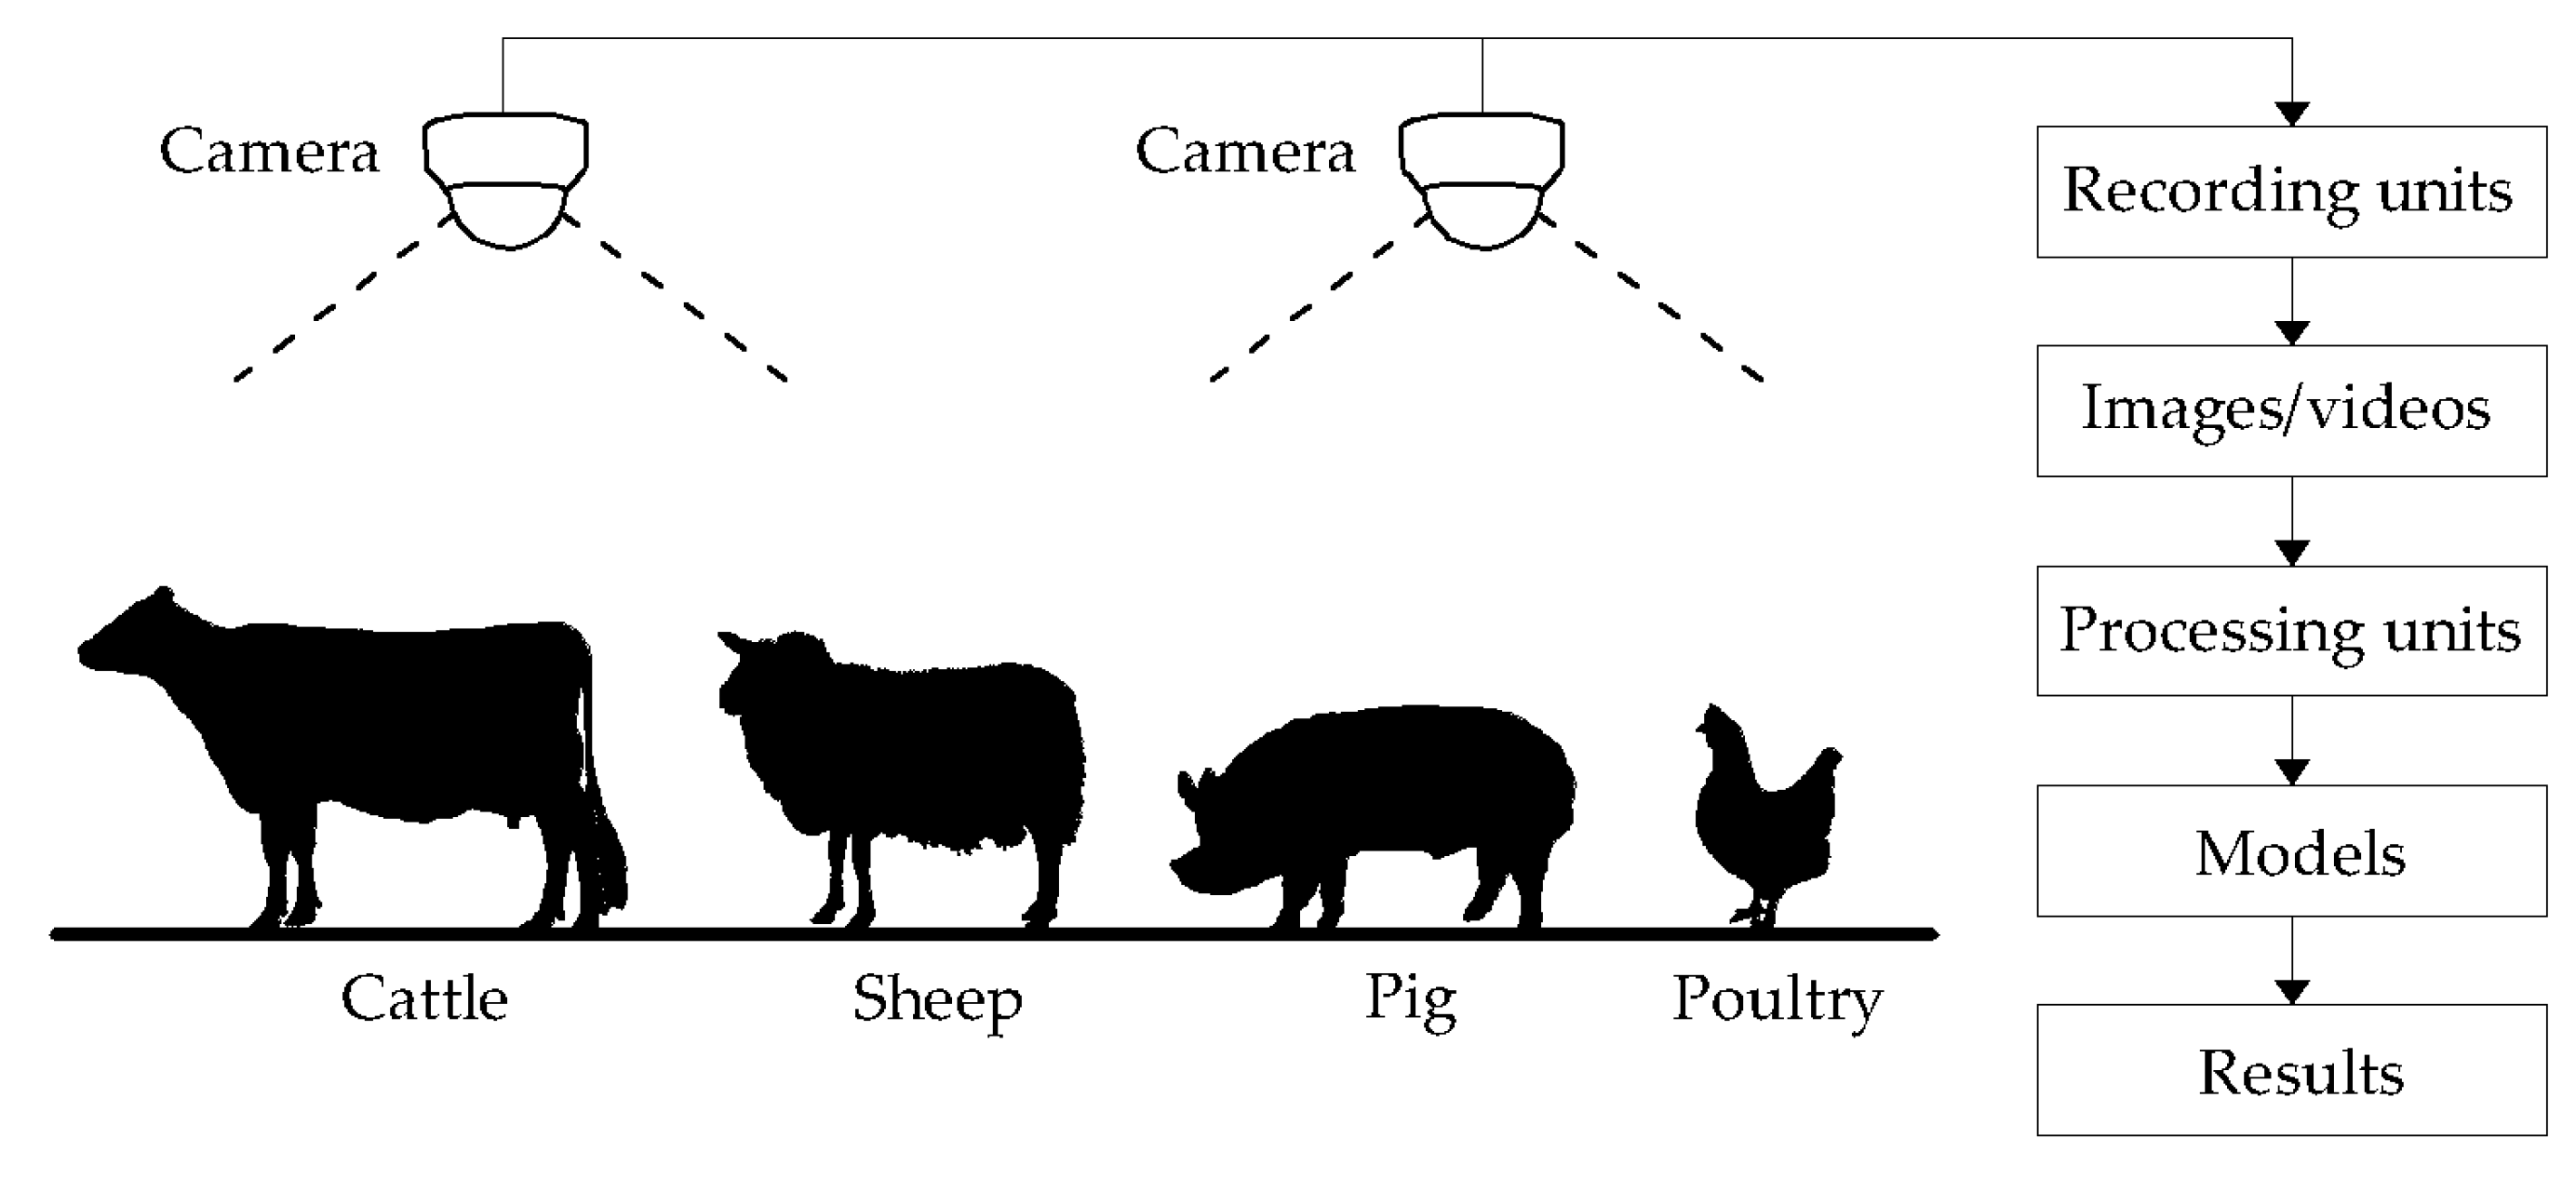 Sensors | Free Full-Text | Practices and Applications of Convolutional  Neural Network-Based Computer Vision Systems in Animal Farming: A Review